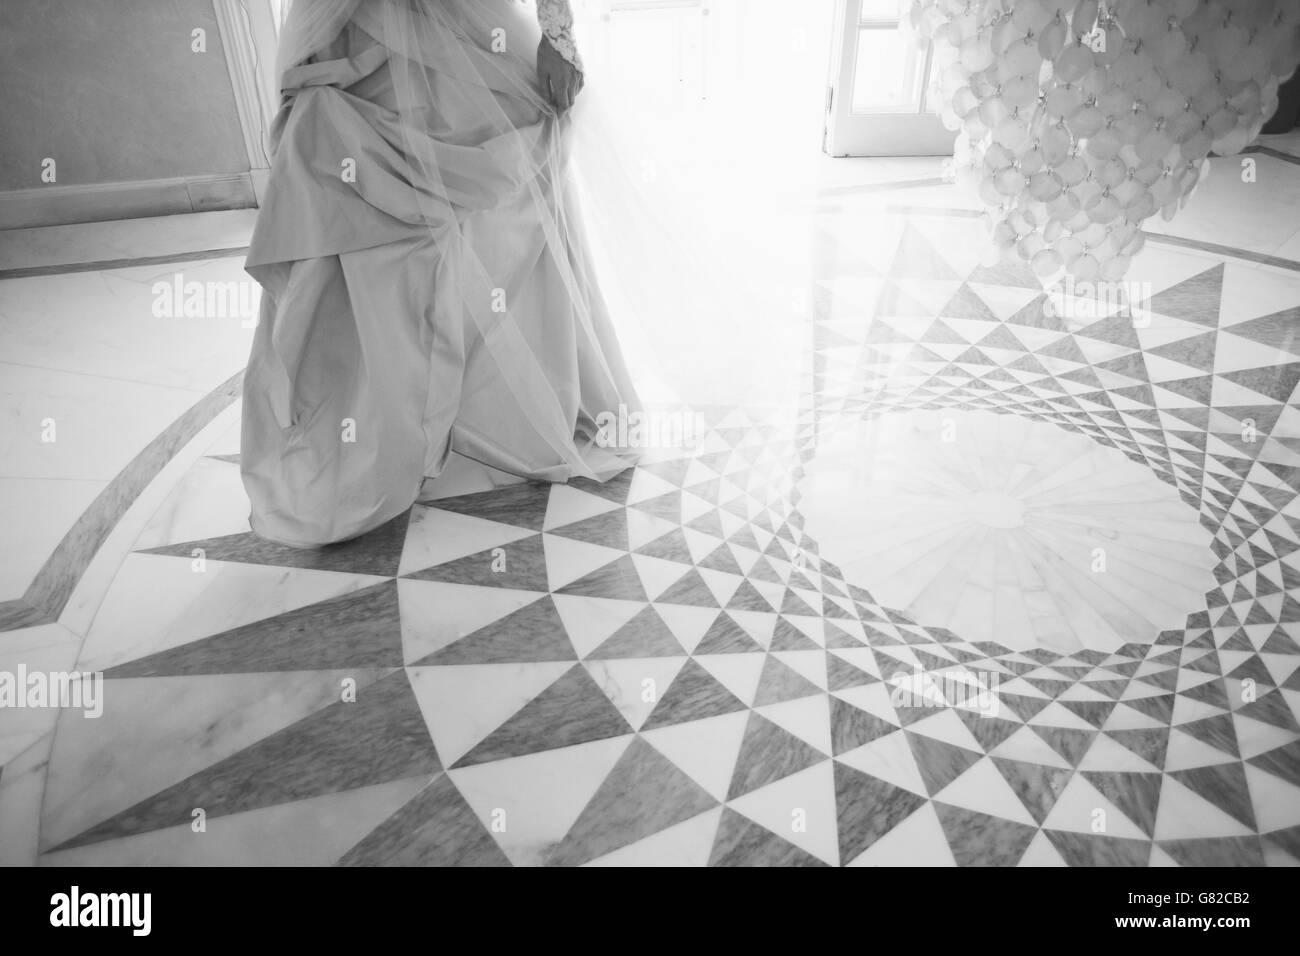 Low section of bride standing on patterned floor Stock Photo